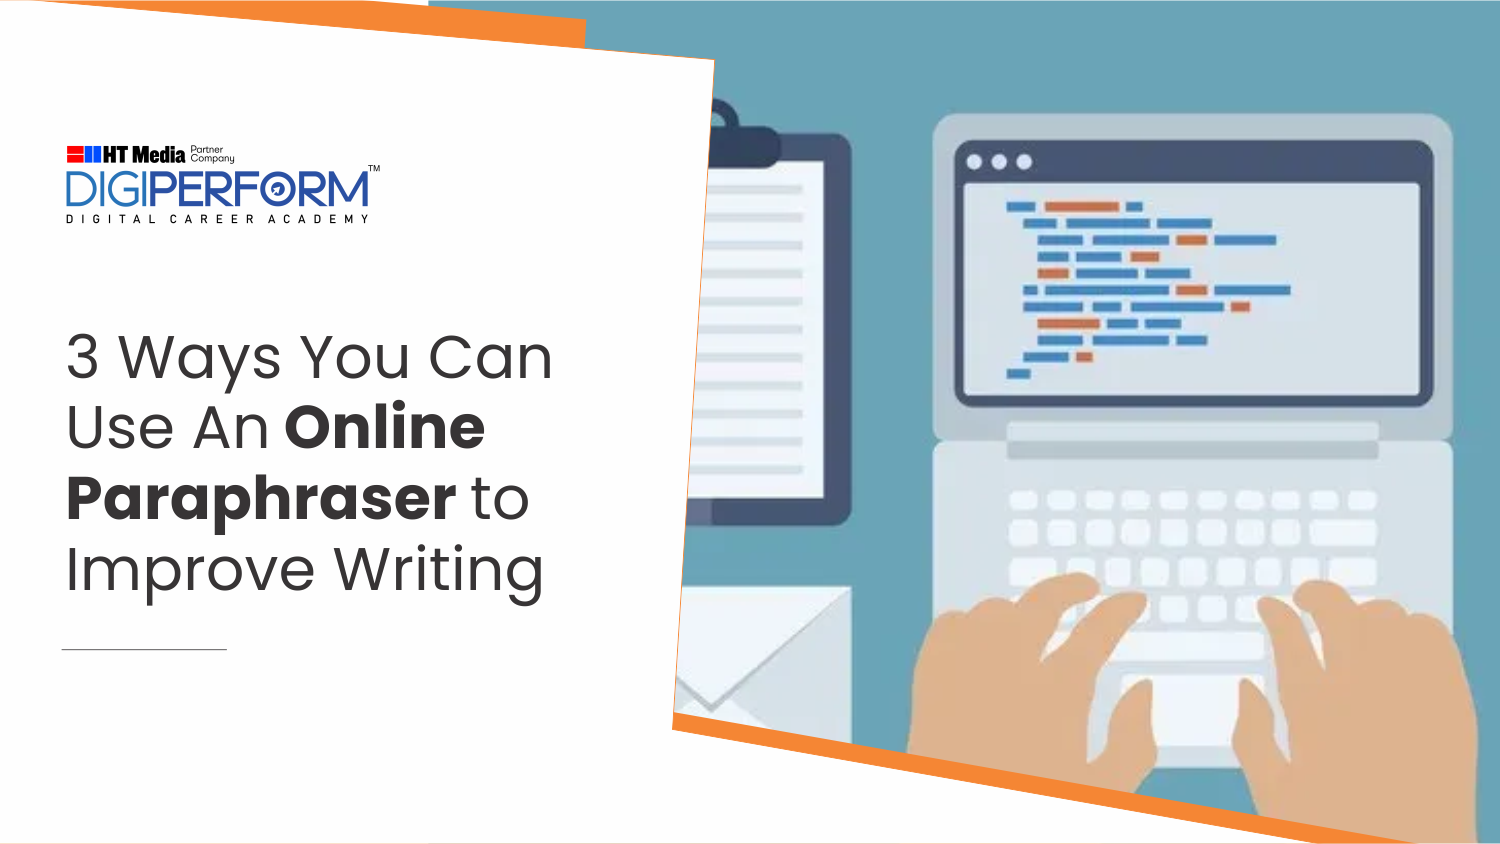 3 Ways You Can Use An Online Paraphraser to Improve Writing